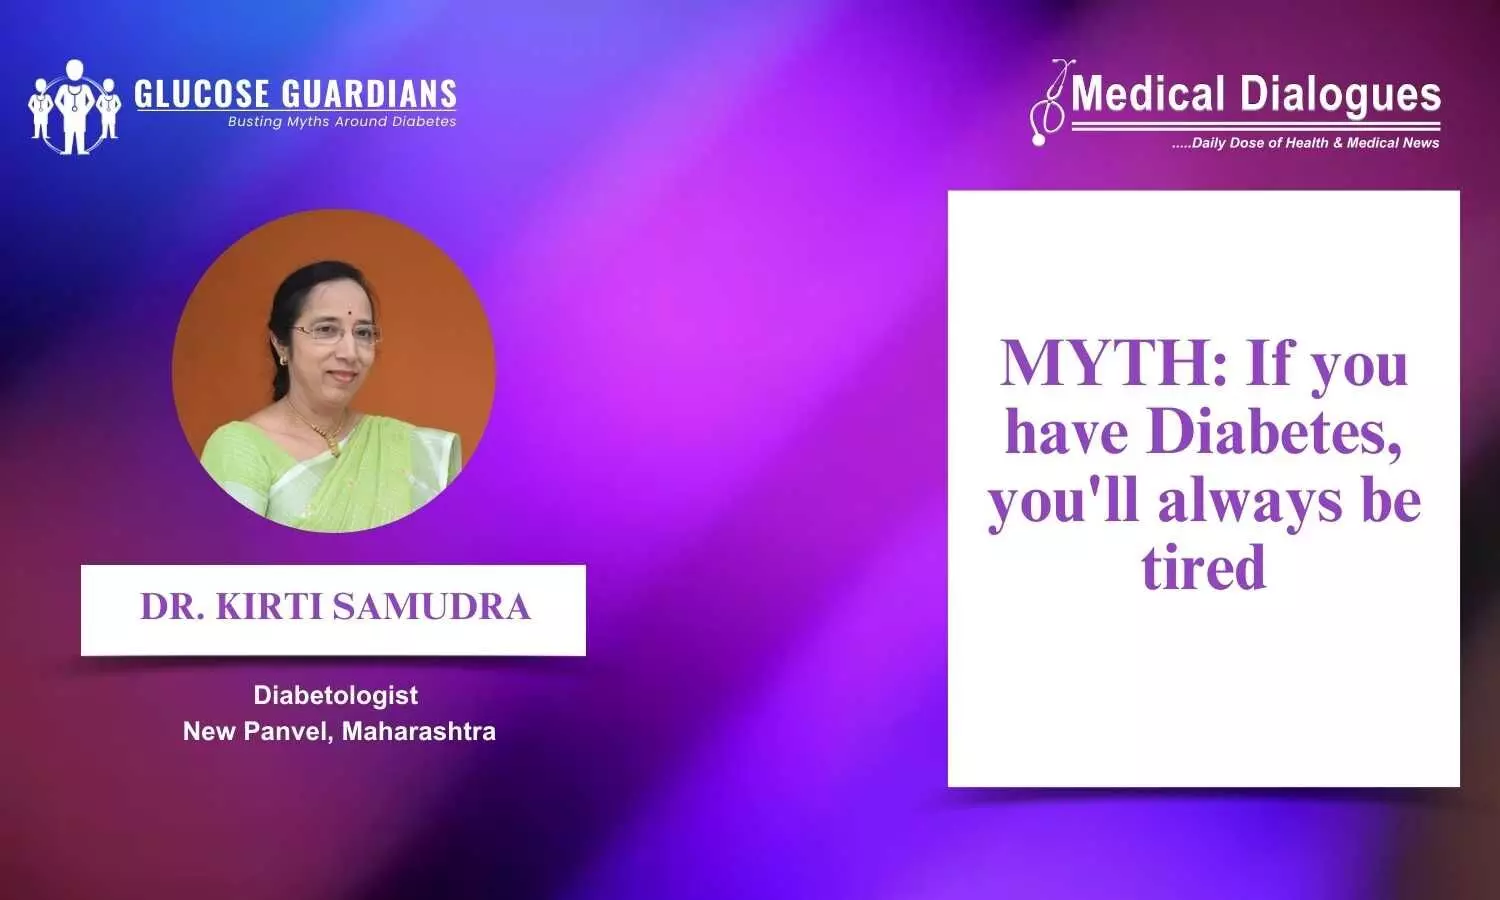 Diabetes and Tiredness: Fact or Fiction? - Dr Kirti Samudra